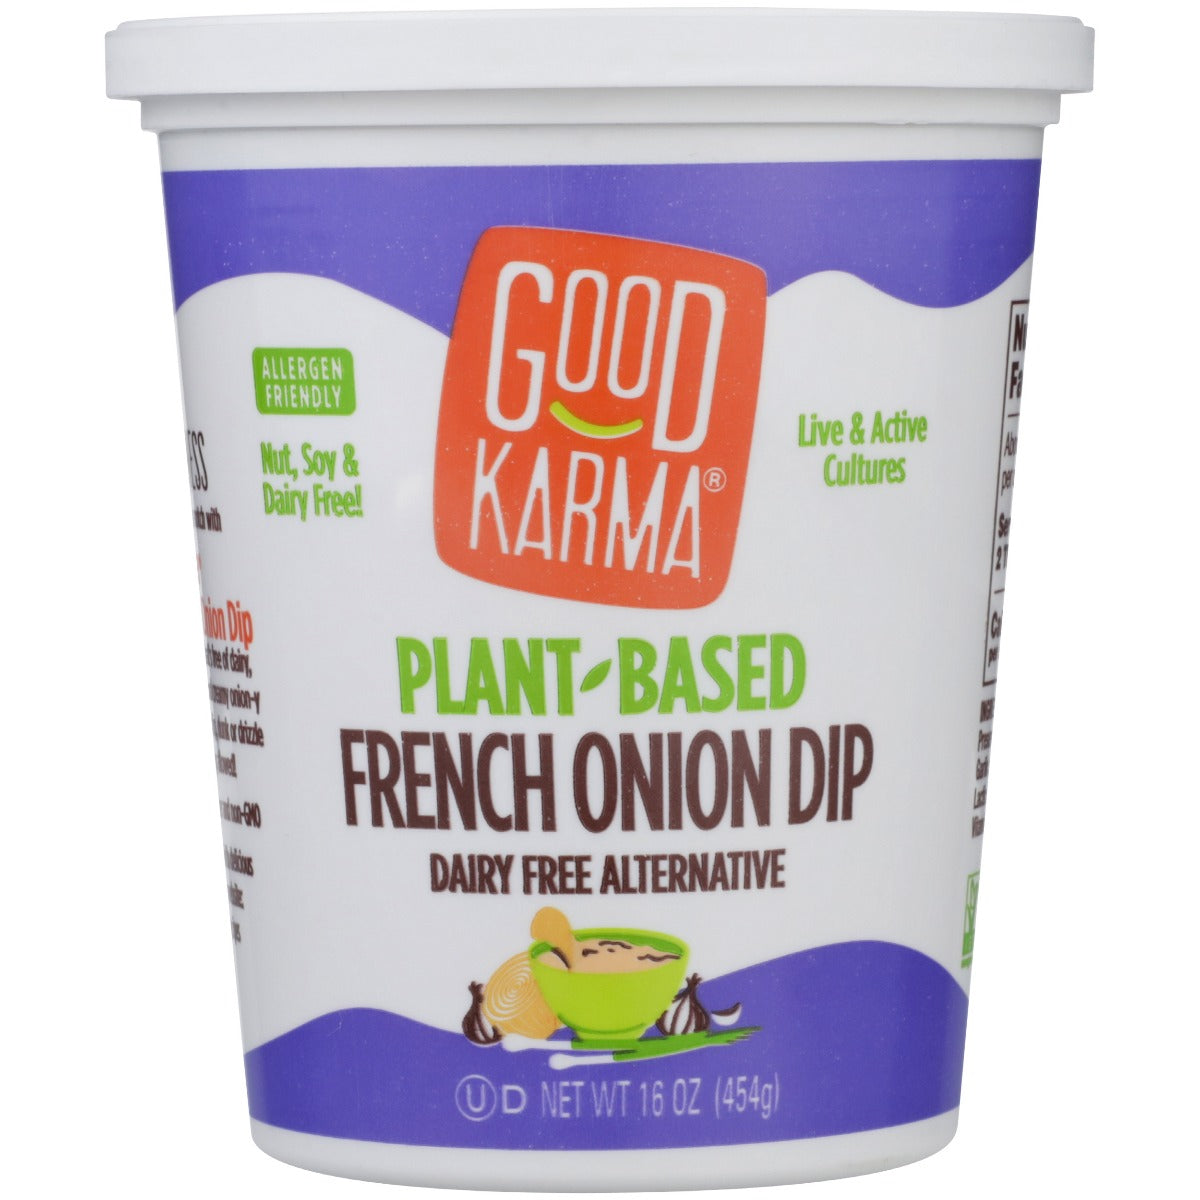 GOOD KARMA: Plant-Based French Onion Dip, 16 oz - Vending Business Solutions